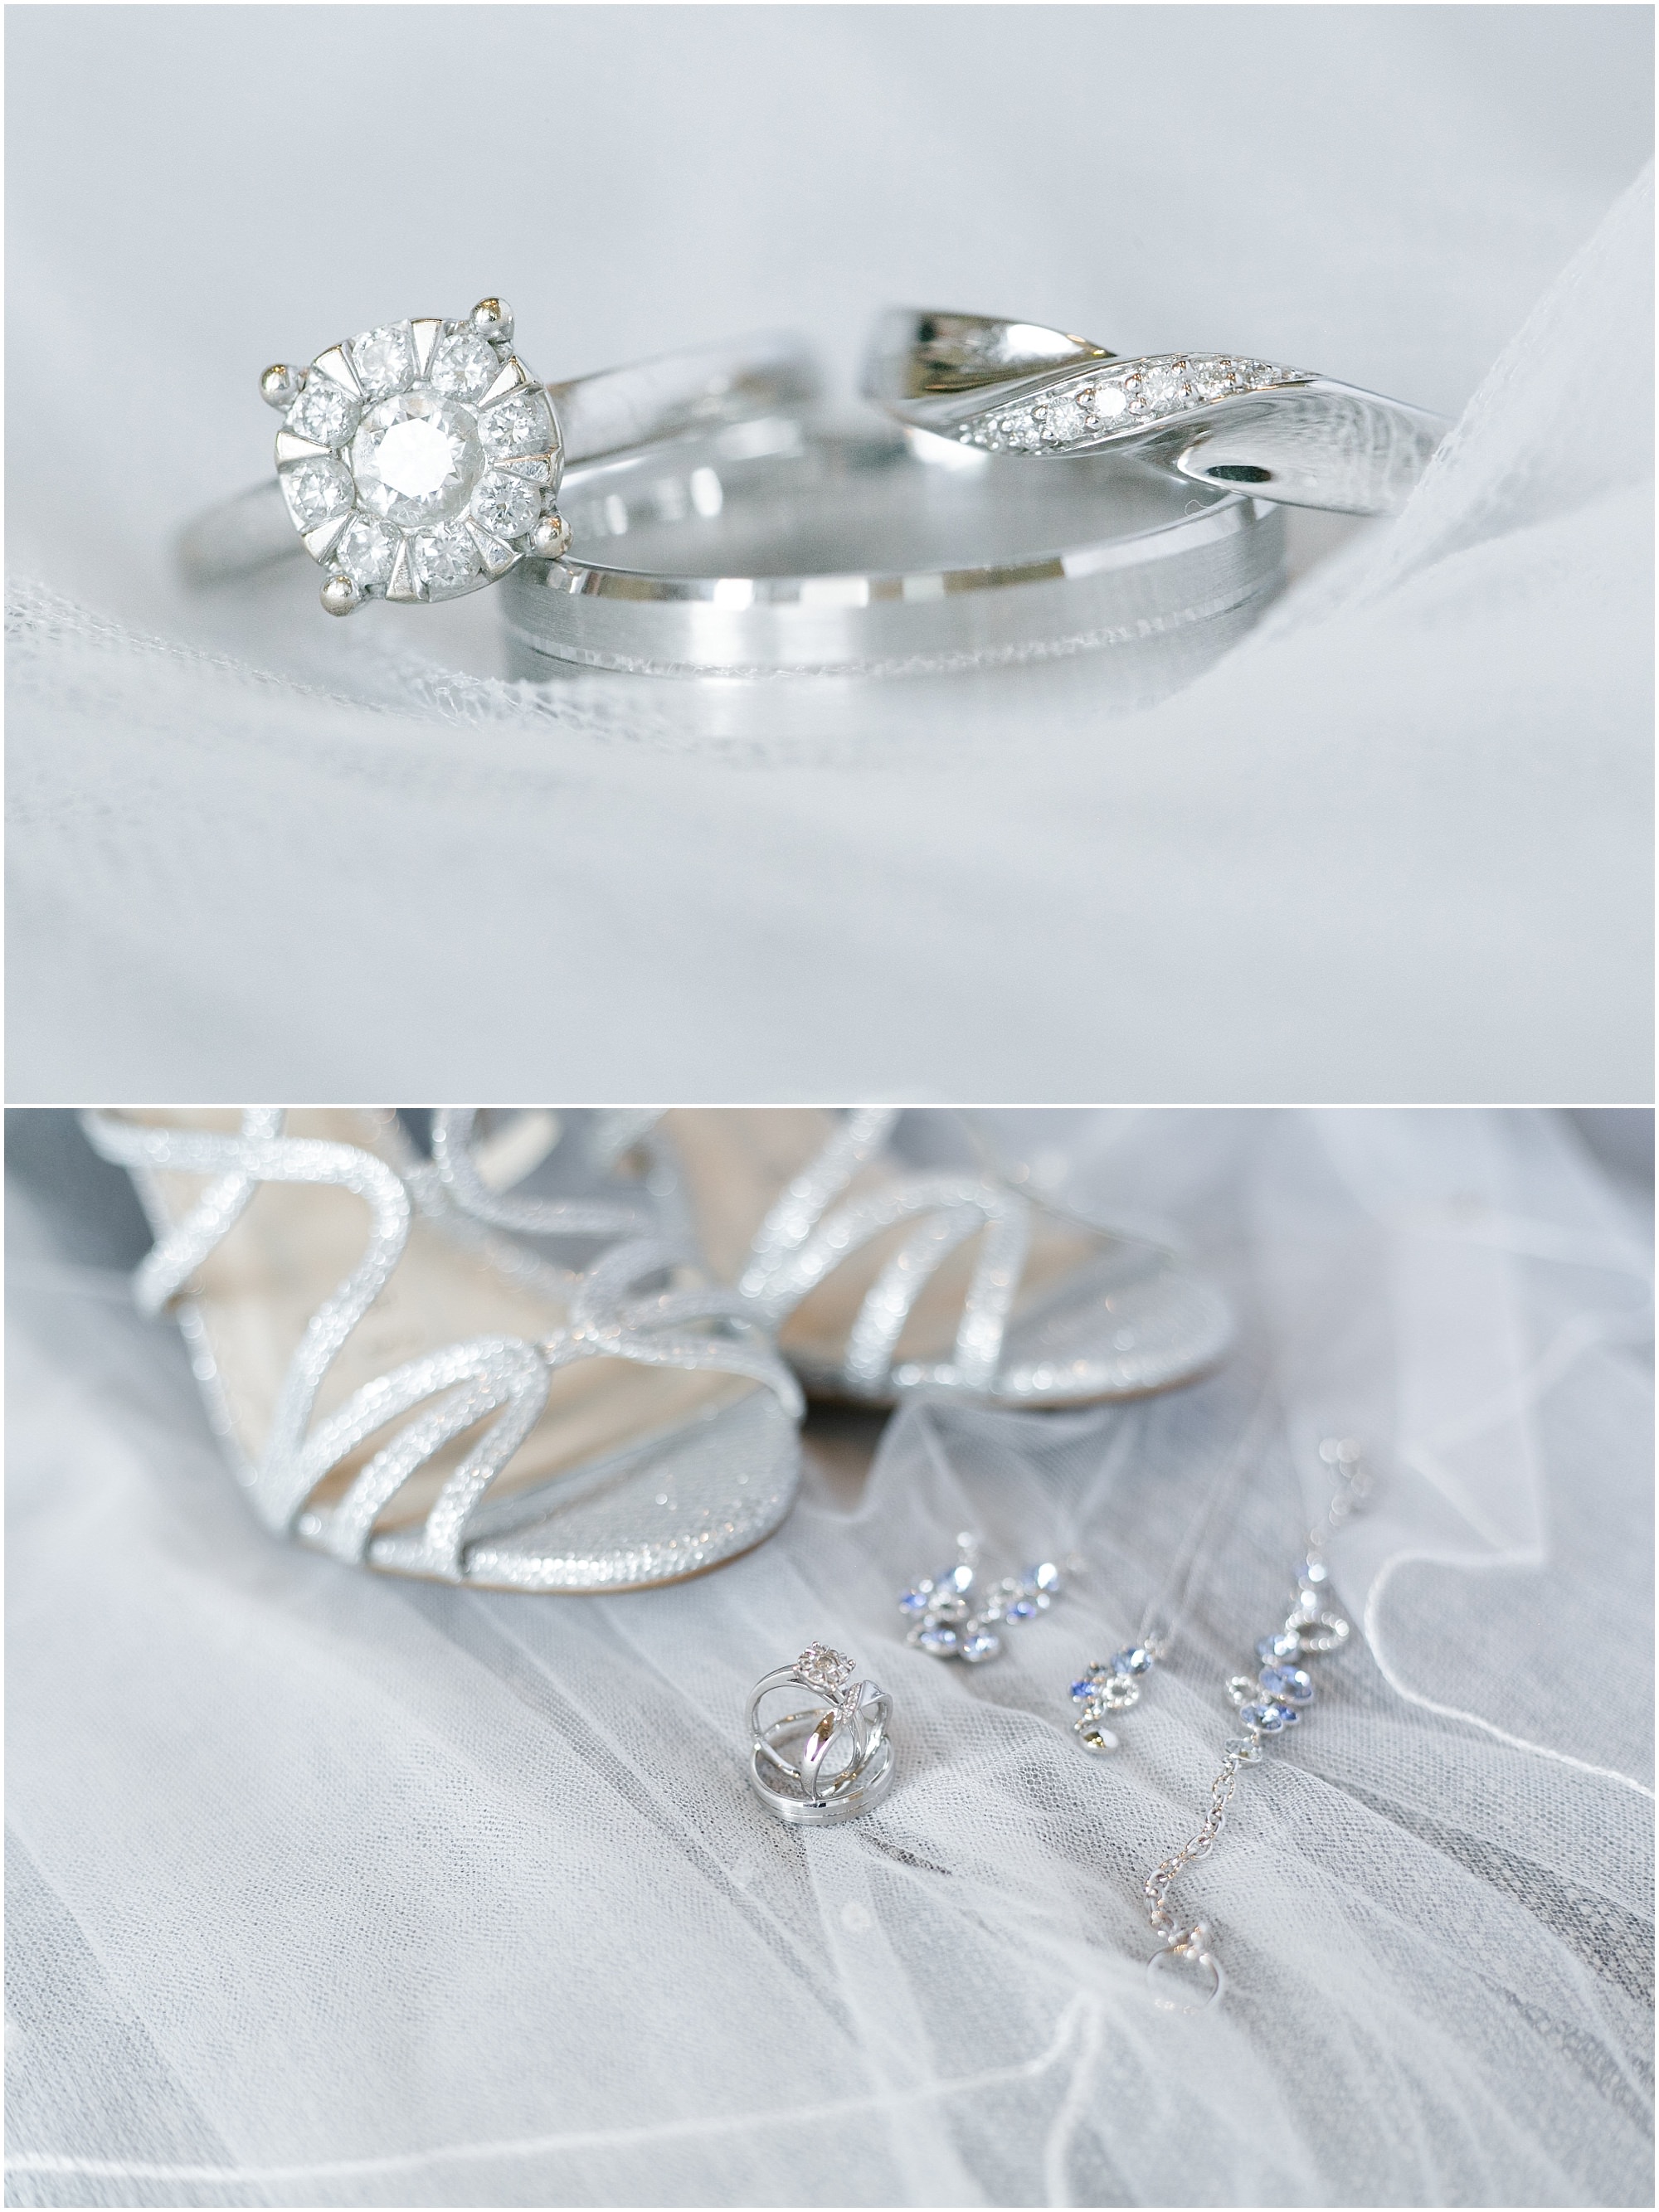 Romantic weekend brunch wedding rings, jewelry, and bride's shoes. 